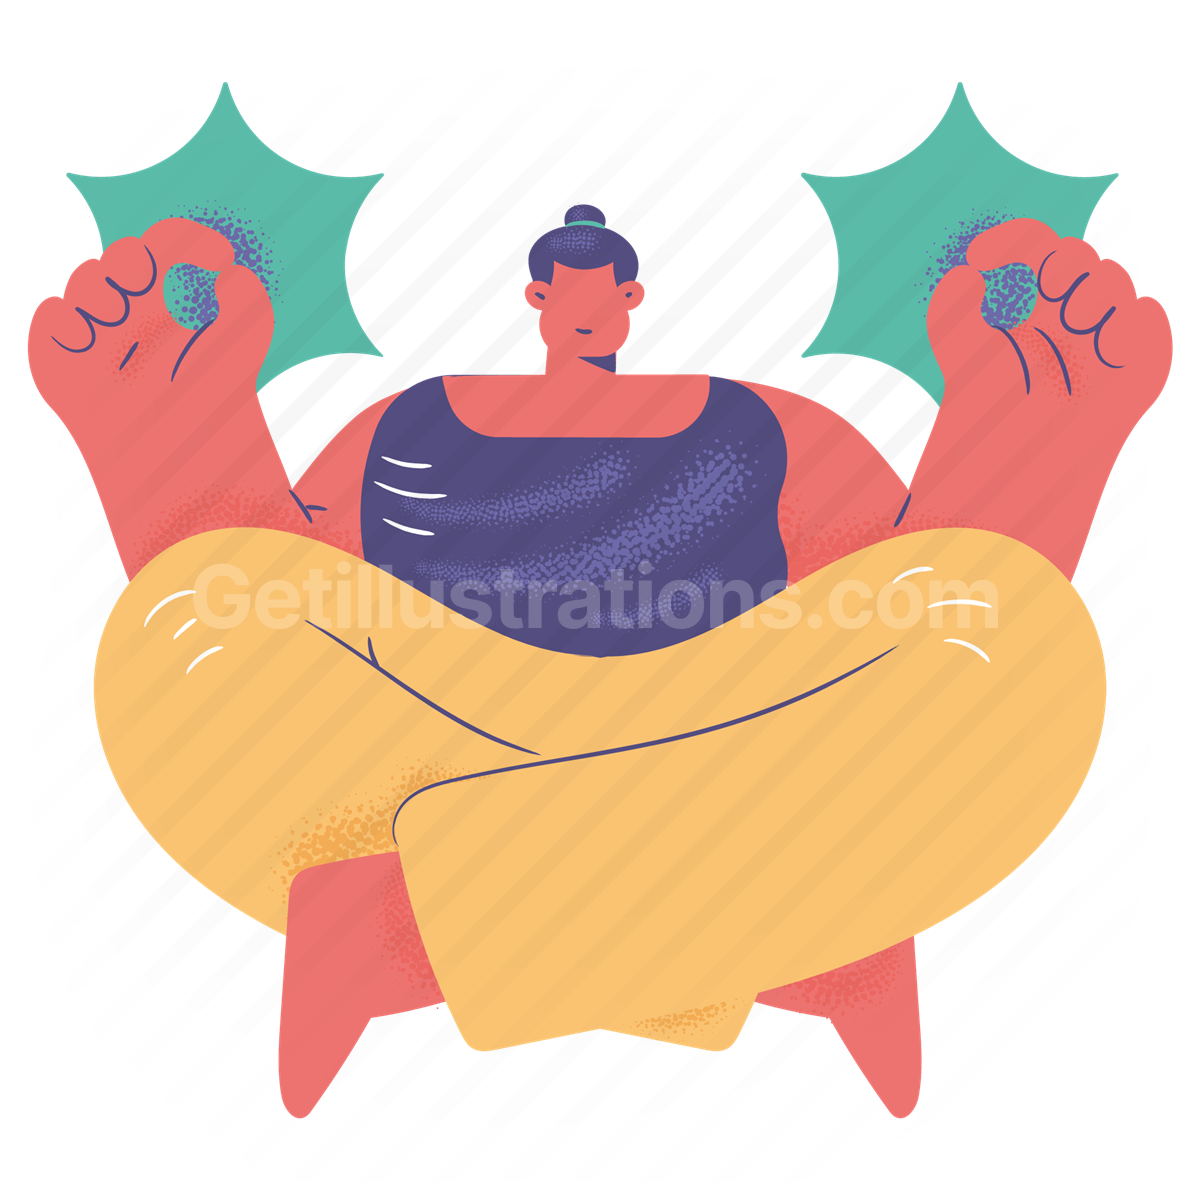 Sports and Fitness illustration